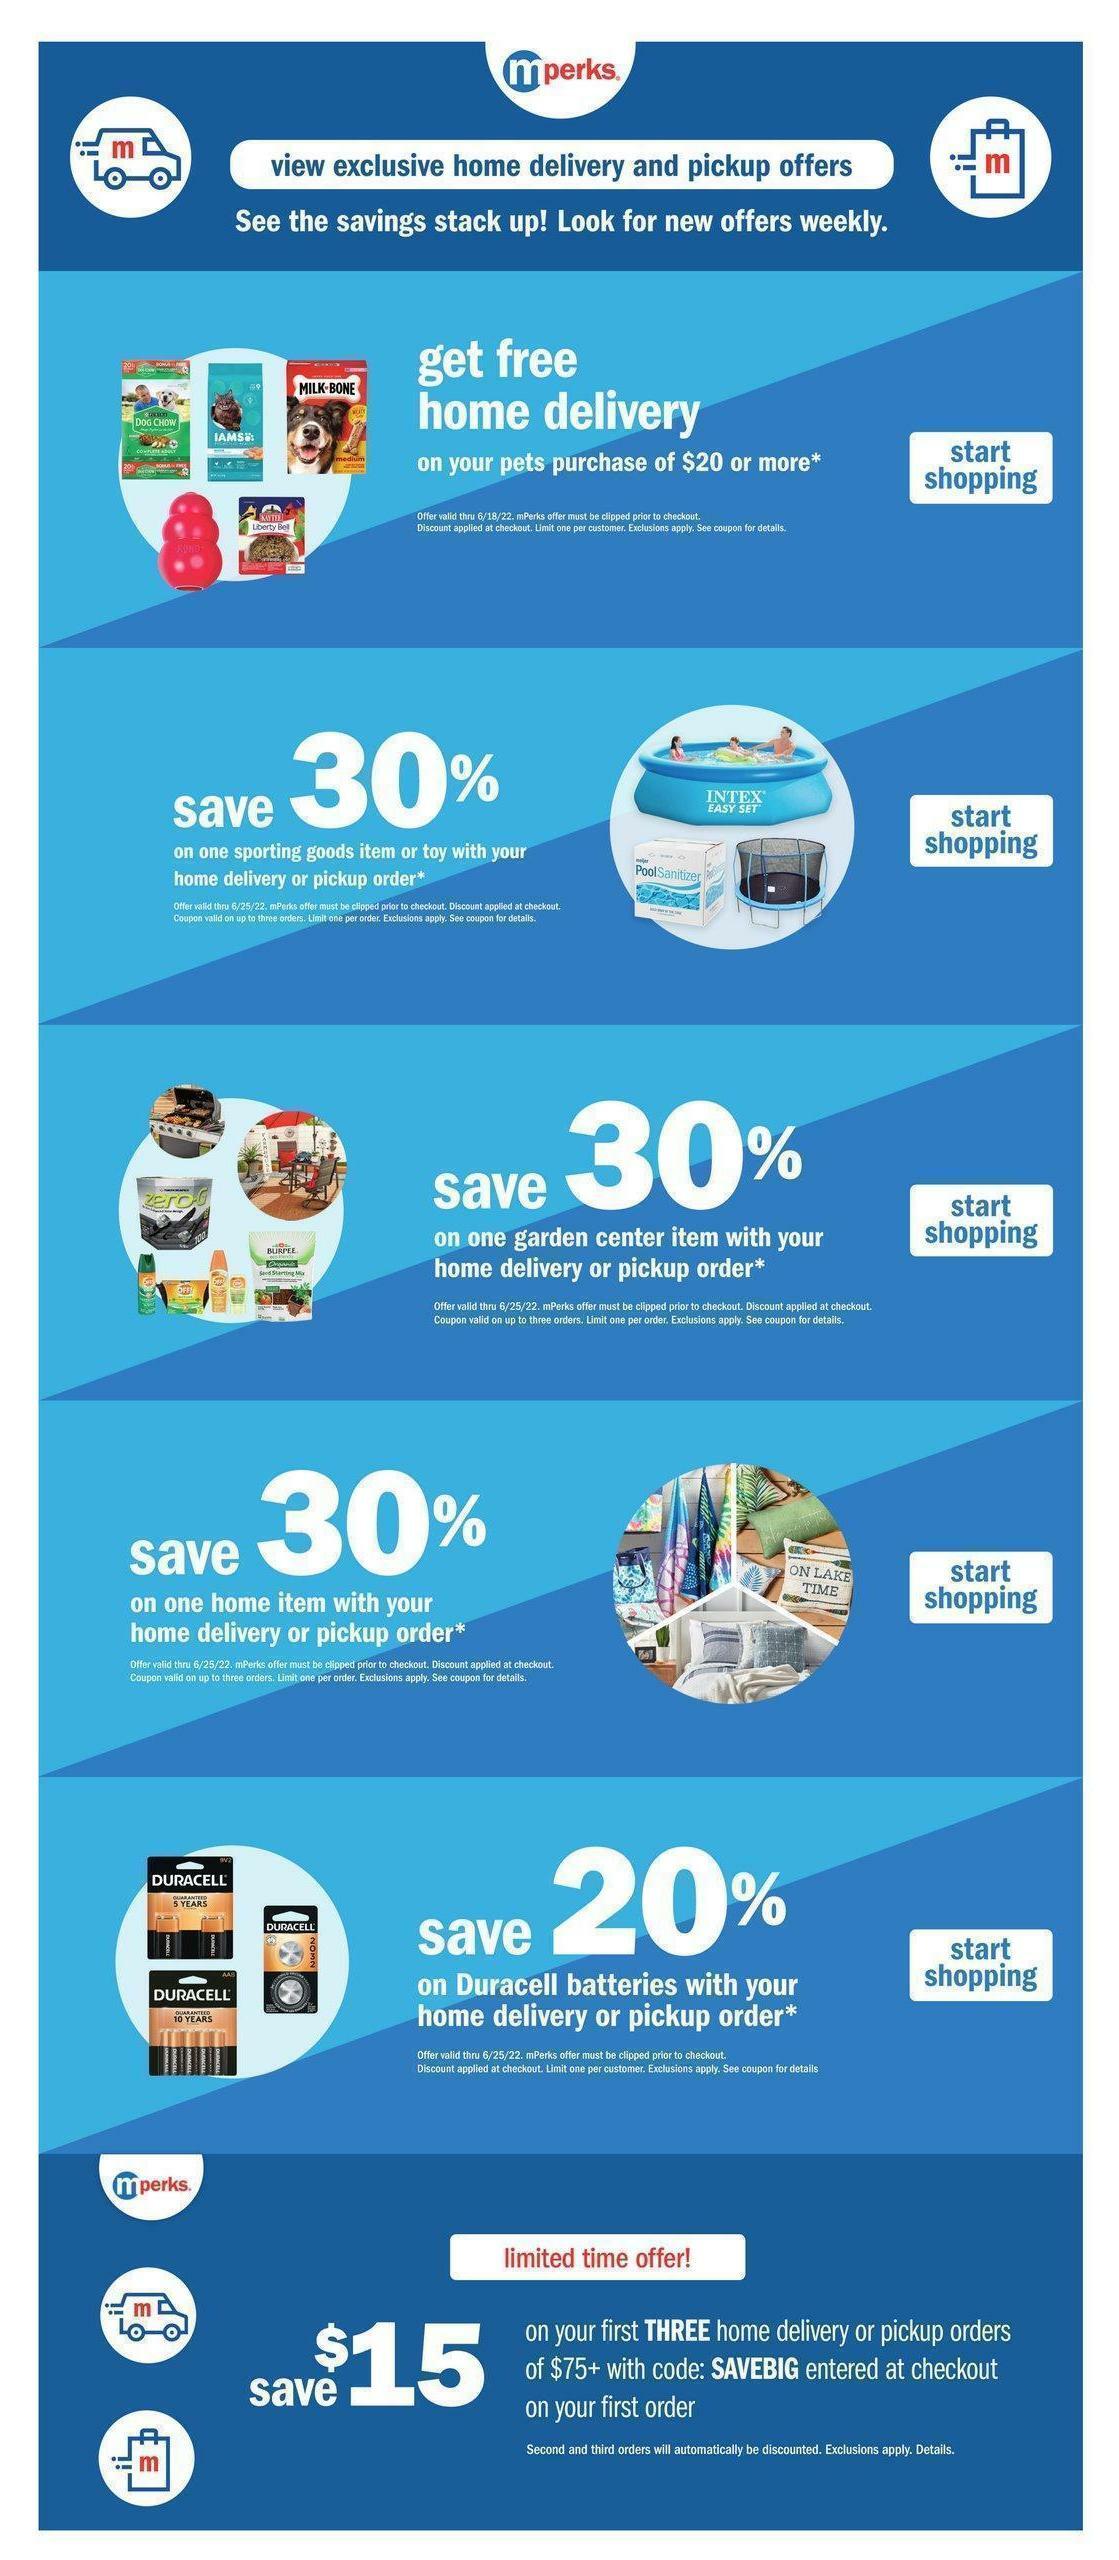 Meijer Weekly Ad from June 12